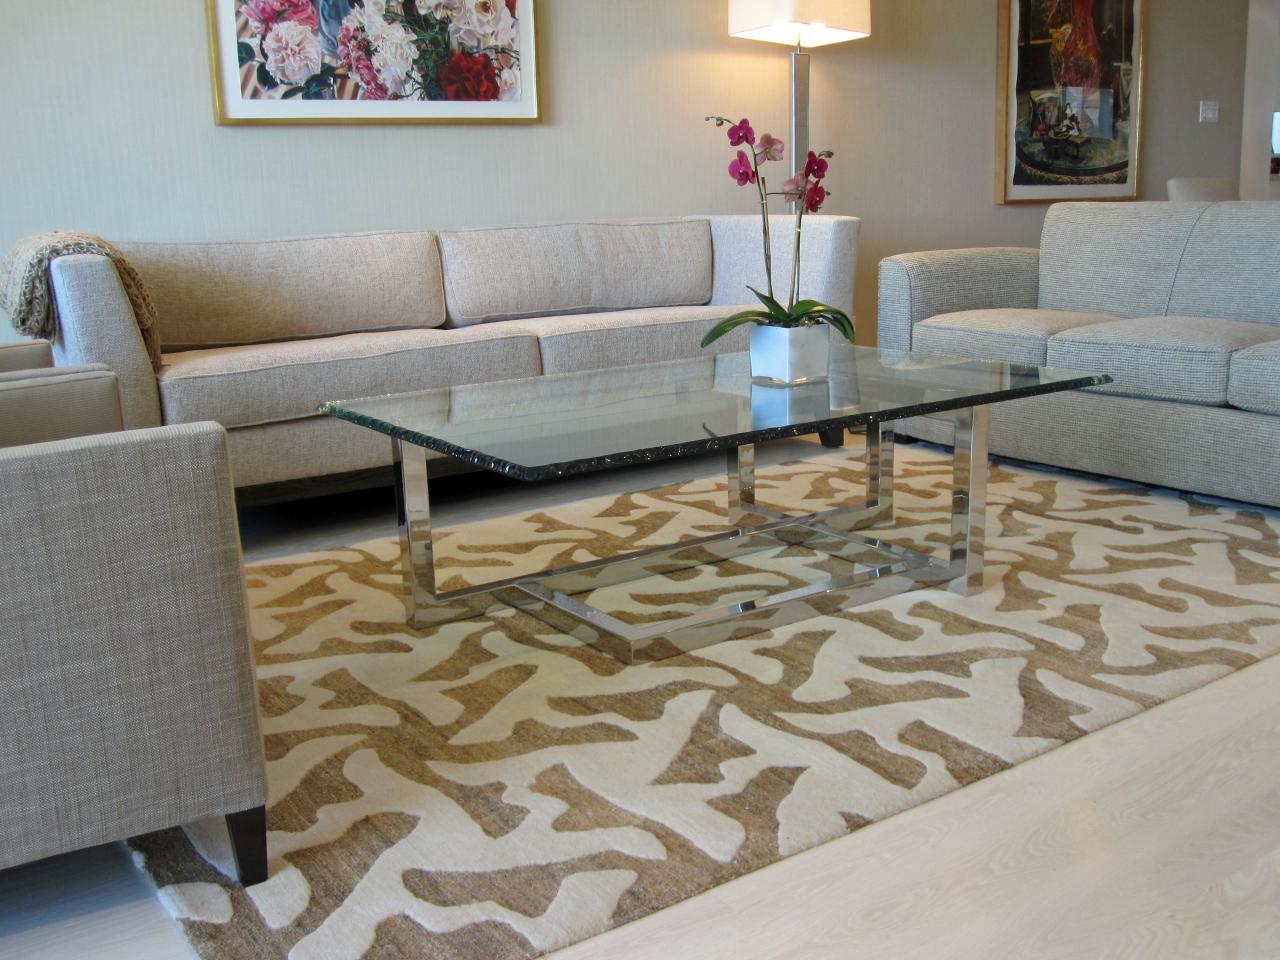 How To Choose Your Living Room Rug, How To Choose An Area Rug